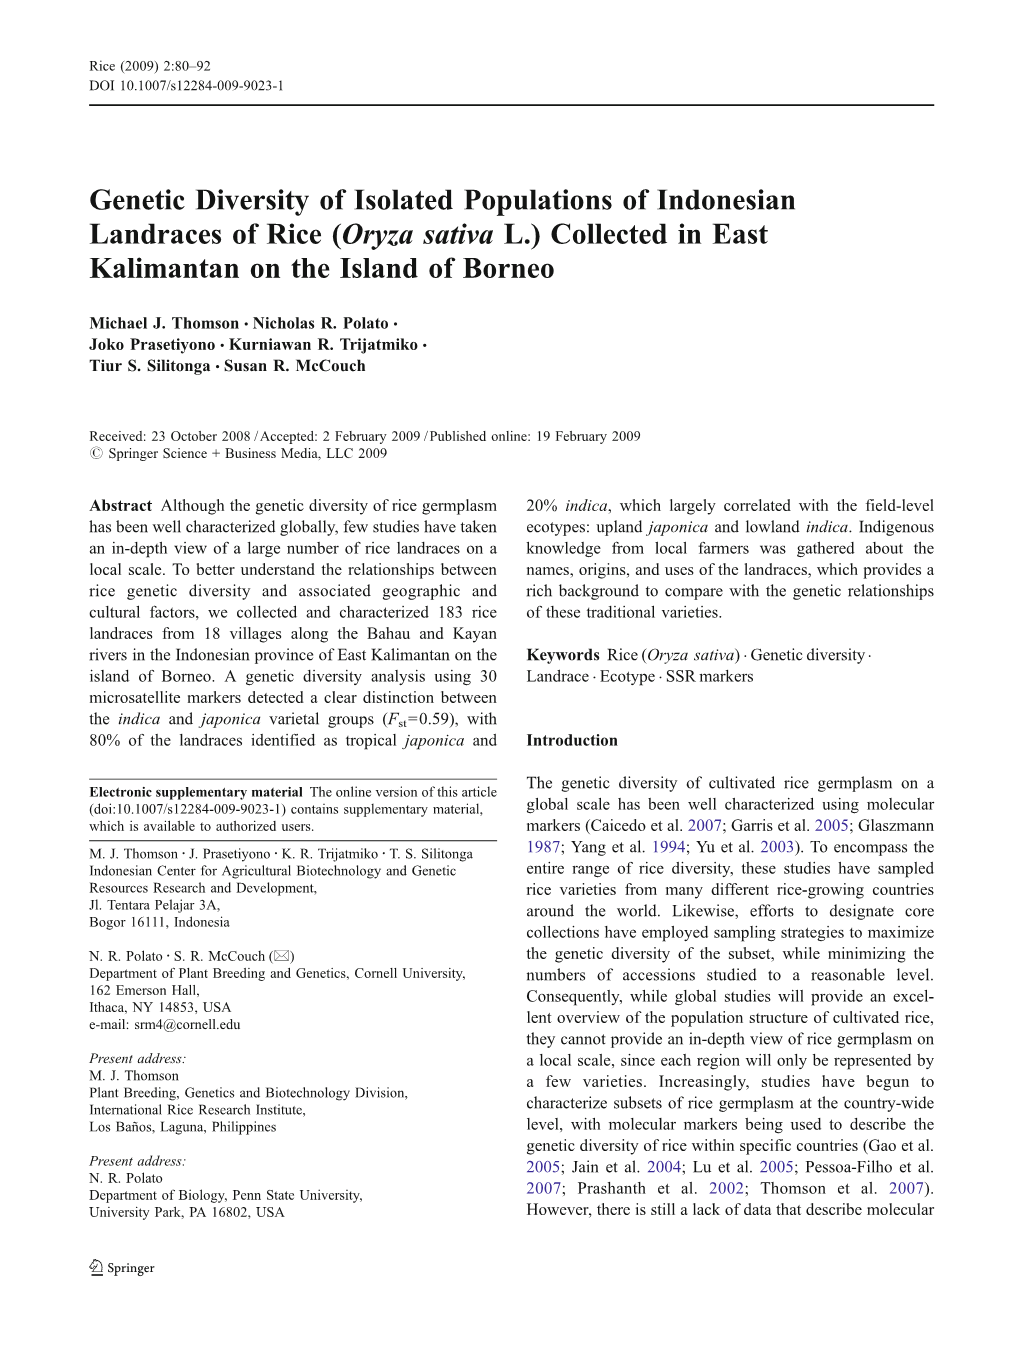 Genetic Diversity of Isolated Populations of Indonesian Landraces of Rice (Oryza Sativa L.) Collected in East Kalimantan on the Island of Borneo